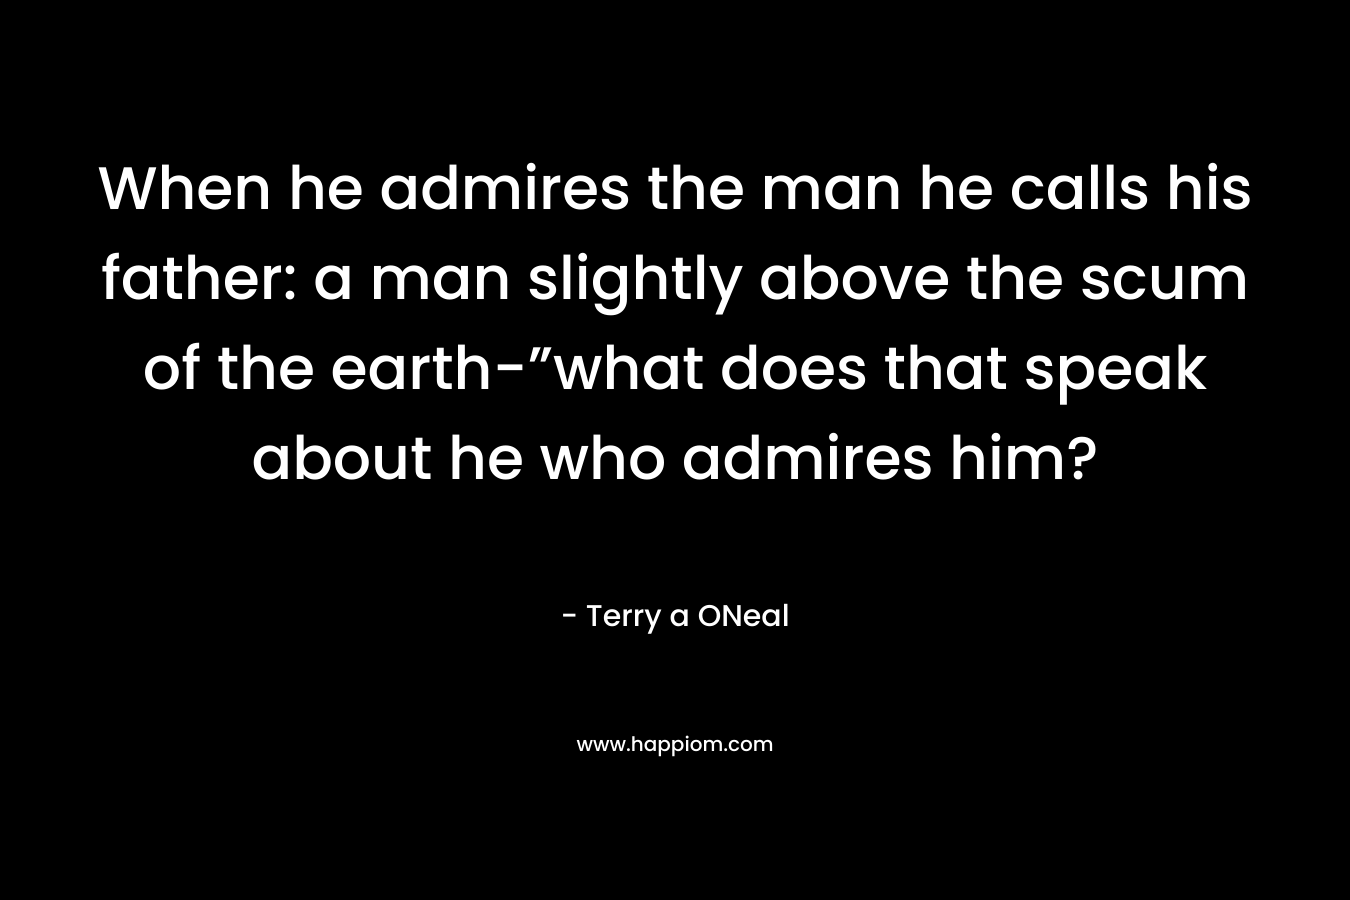 When he admires the man he calls his father: a man slightly above the scum of the earth-”what does that speak about he who admires him? – Terry a ONeal